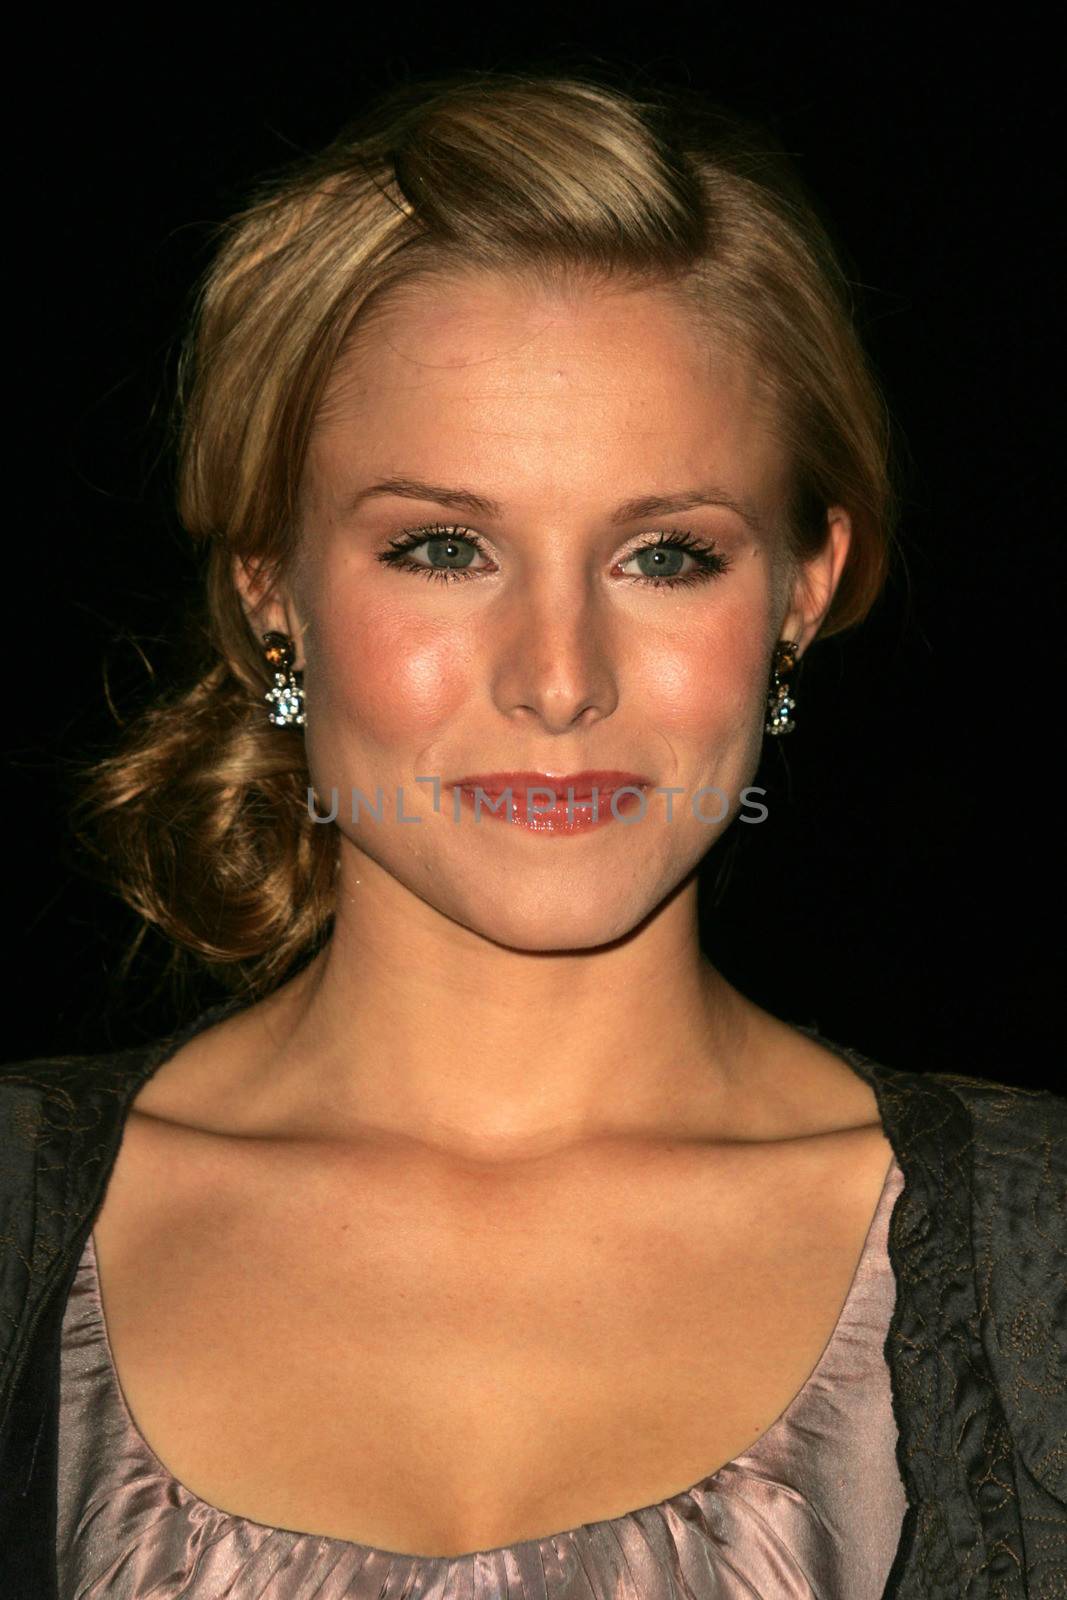 Kristen Bell
at the 2nd Annual A Fine Romance, Hollywood and Broadway Musical Fundraiser. Sunset Gower Studios, Hollywood, CA. 11-18-06